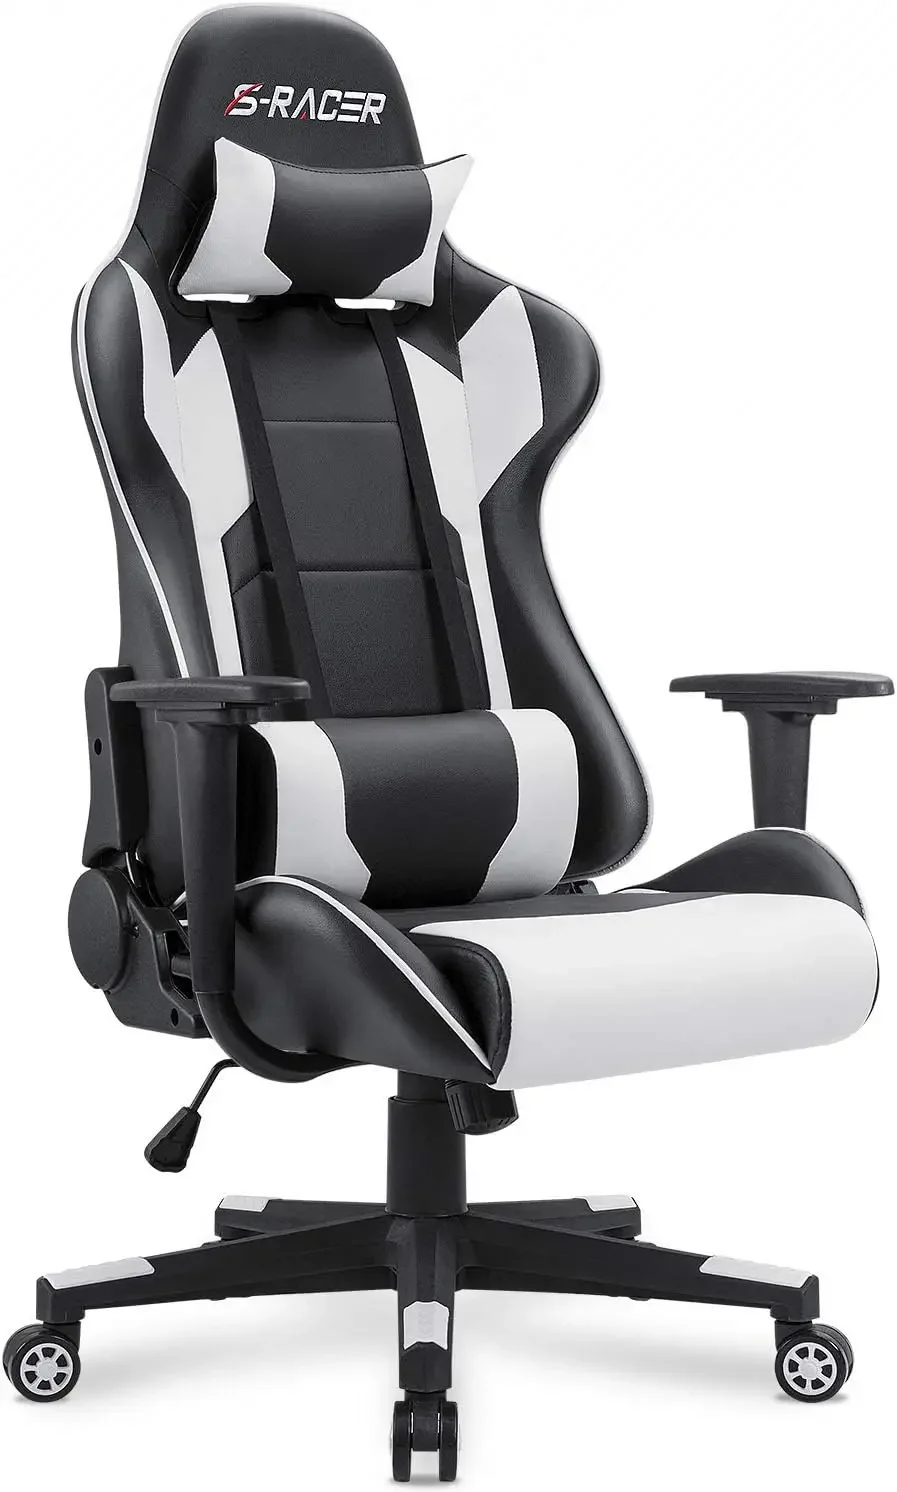 

High Back Computer Chair Leather Chair Racing Executive Ergonomic Adjustable Swivel Task Chair with Headrest and Lumbar Support